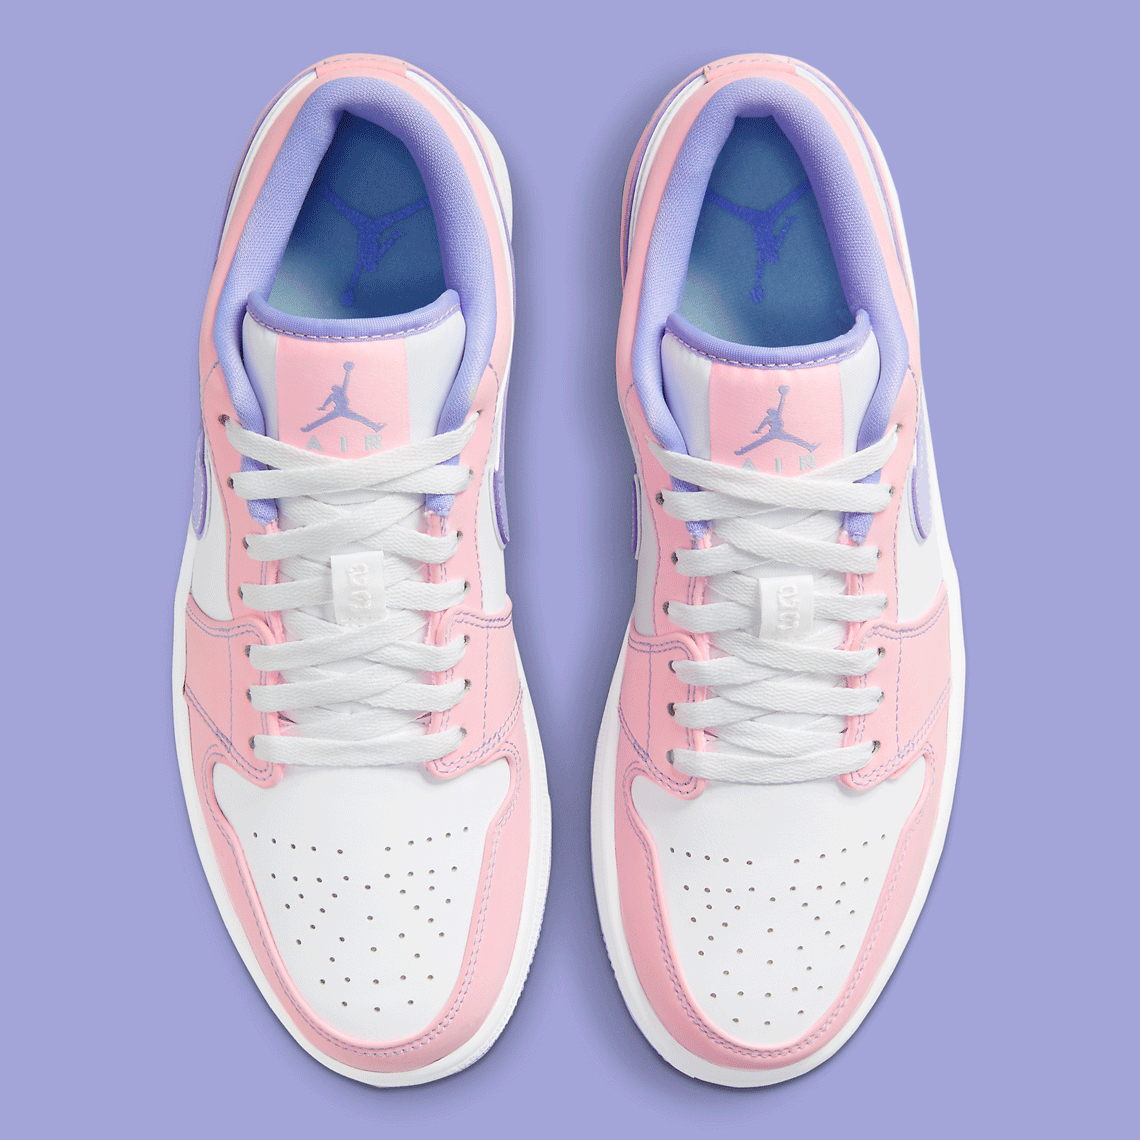 Buy > white pink and purple jordans > in stock